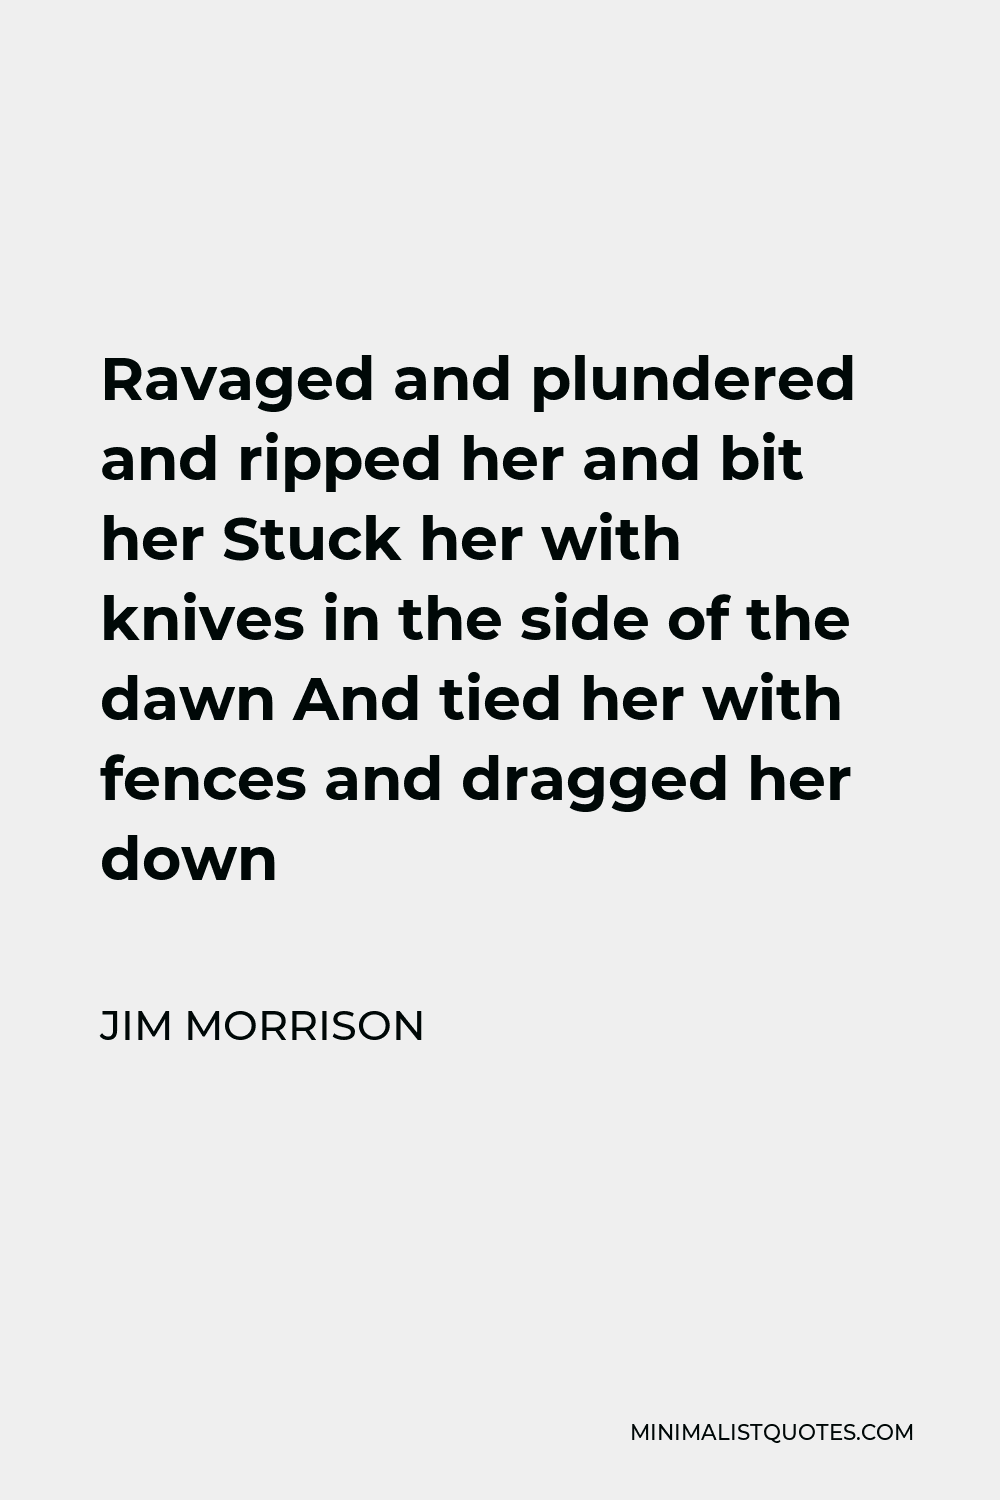 Jim Morrison Quote - Ravaged and plundered and ripped her and bit her Stuck her with knives in the side of the dawn And tied her with fences and dragged her down